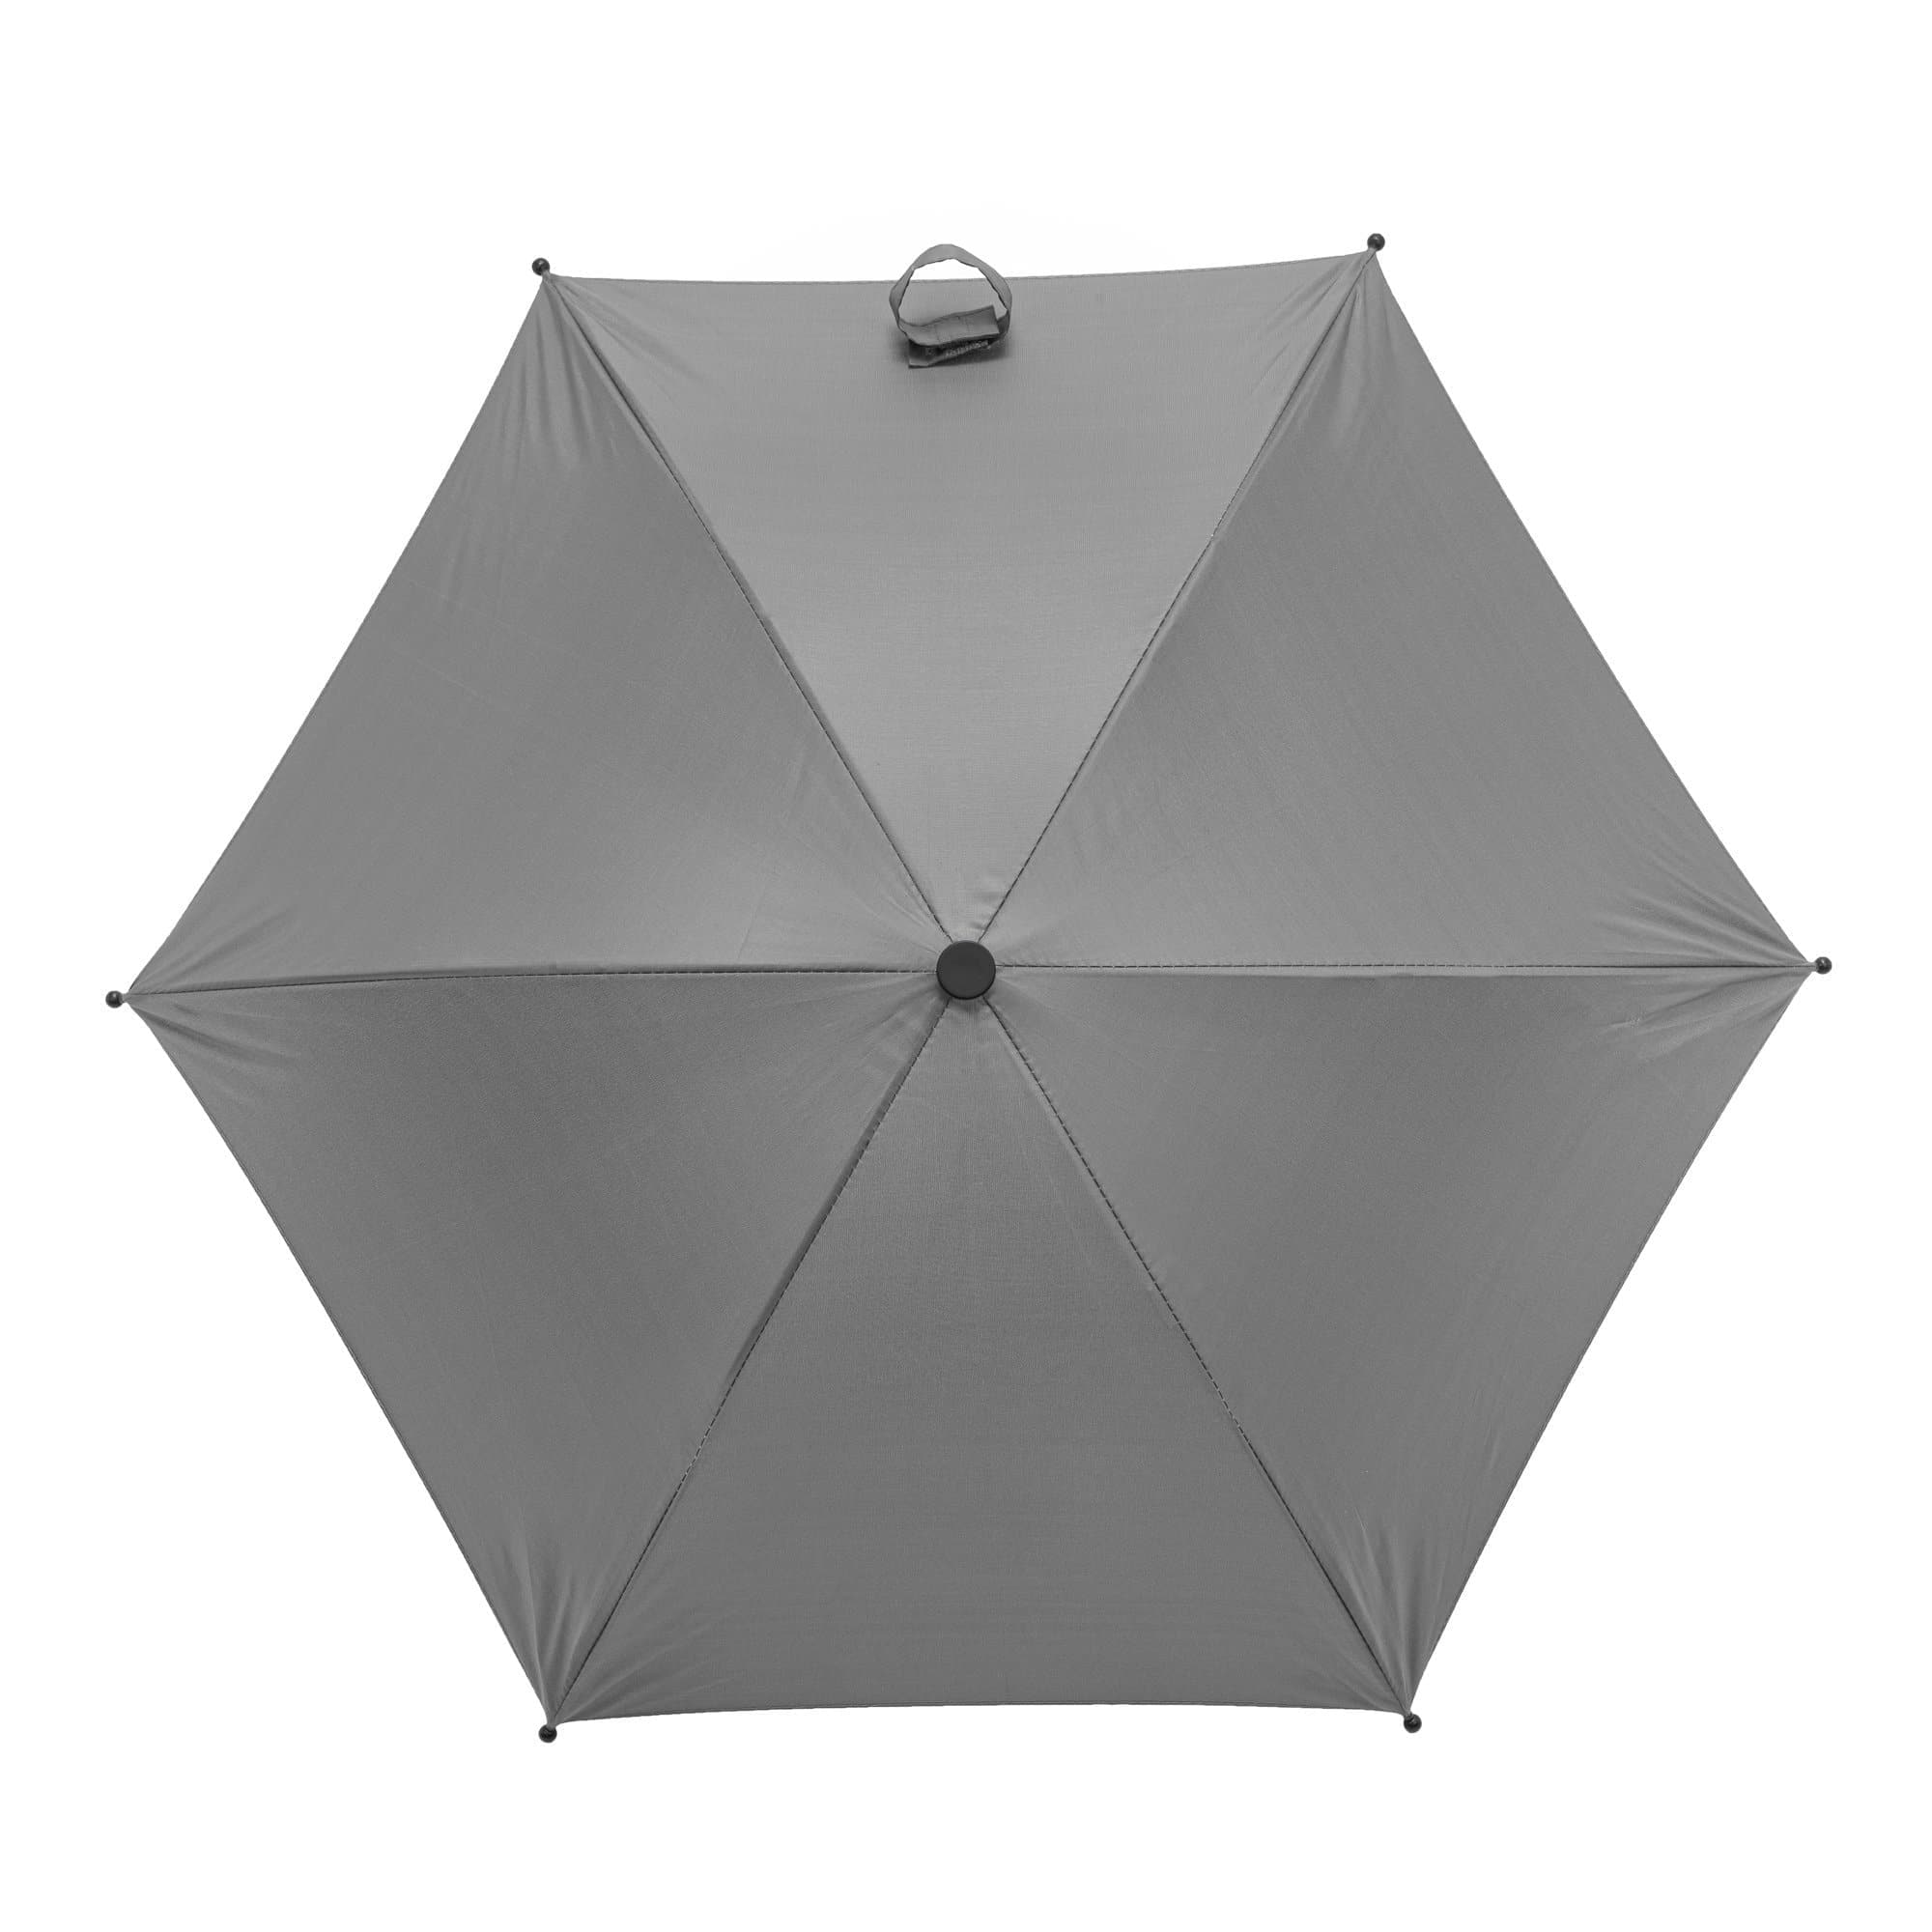 Baby Parasol Compatible With Bebe 9 - Fits All Models - For Your Little One